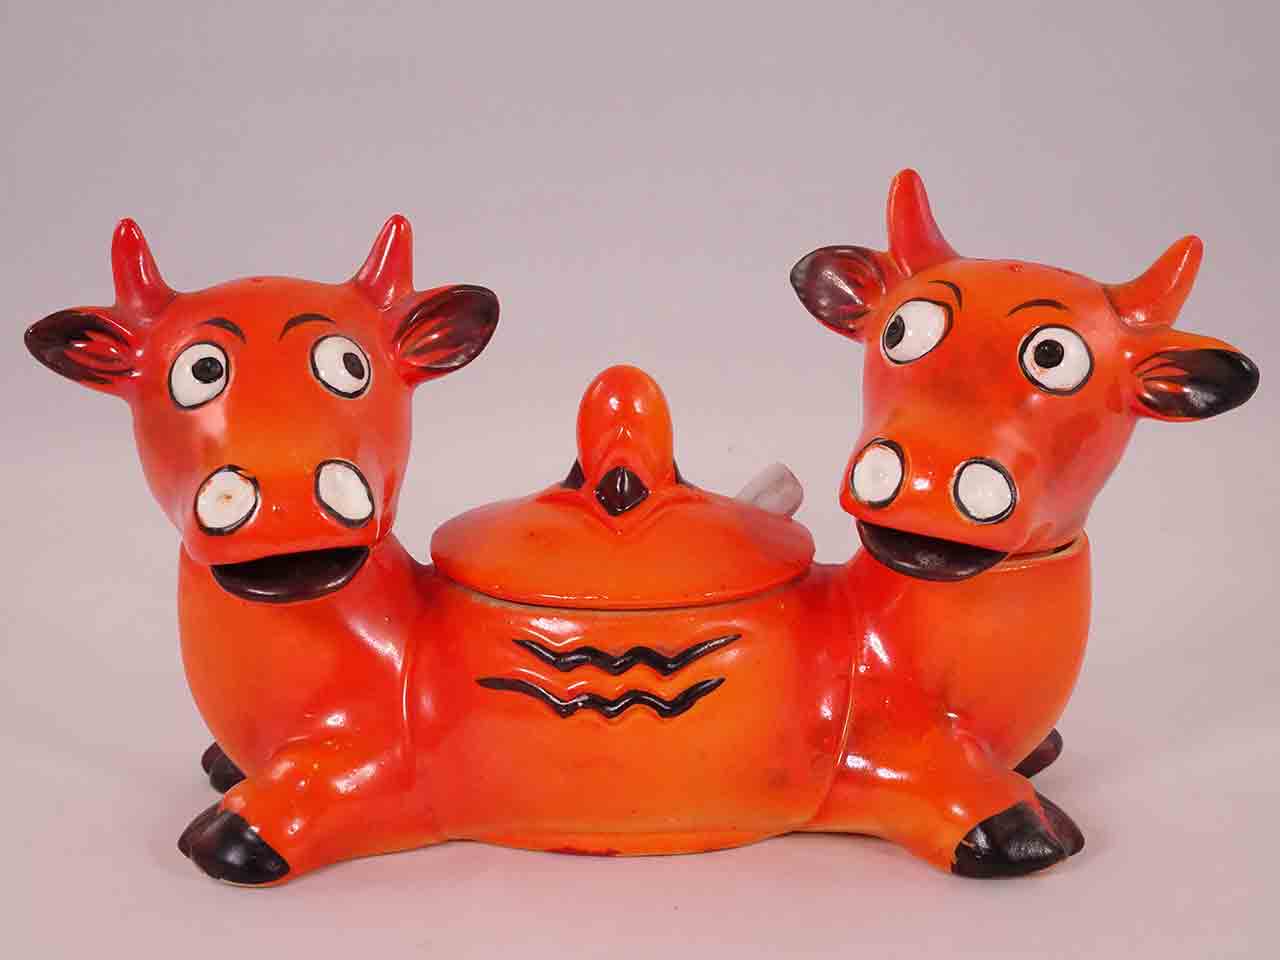 Germany two-headed cow condiment salt and pepper shakers